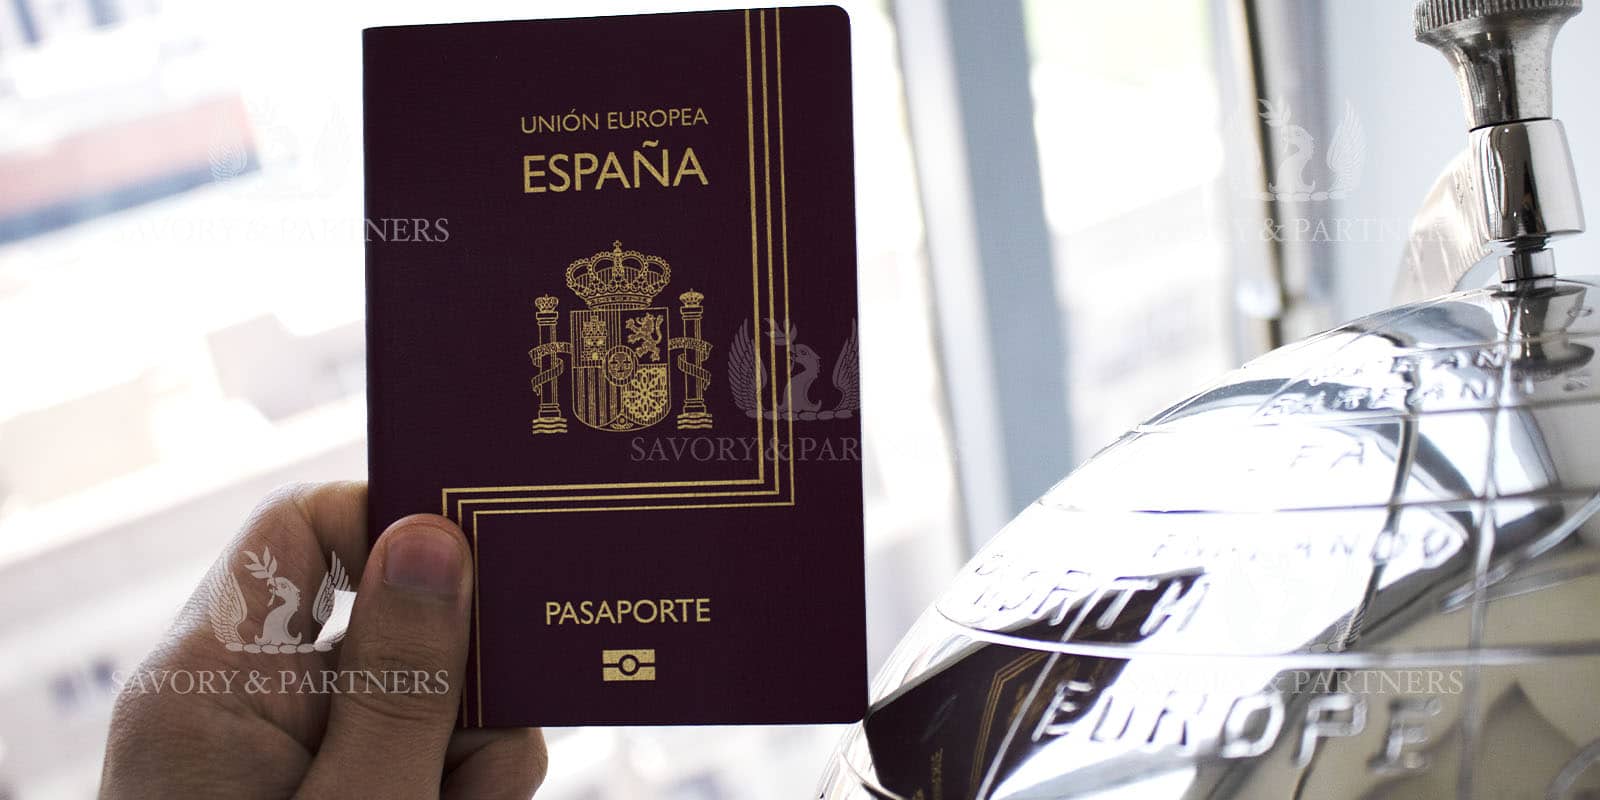 Passport from Spain at Savory & Partners office in Dubai.